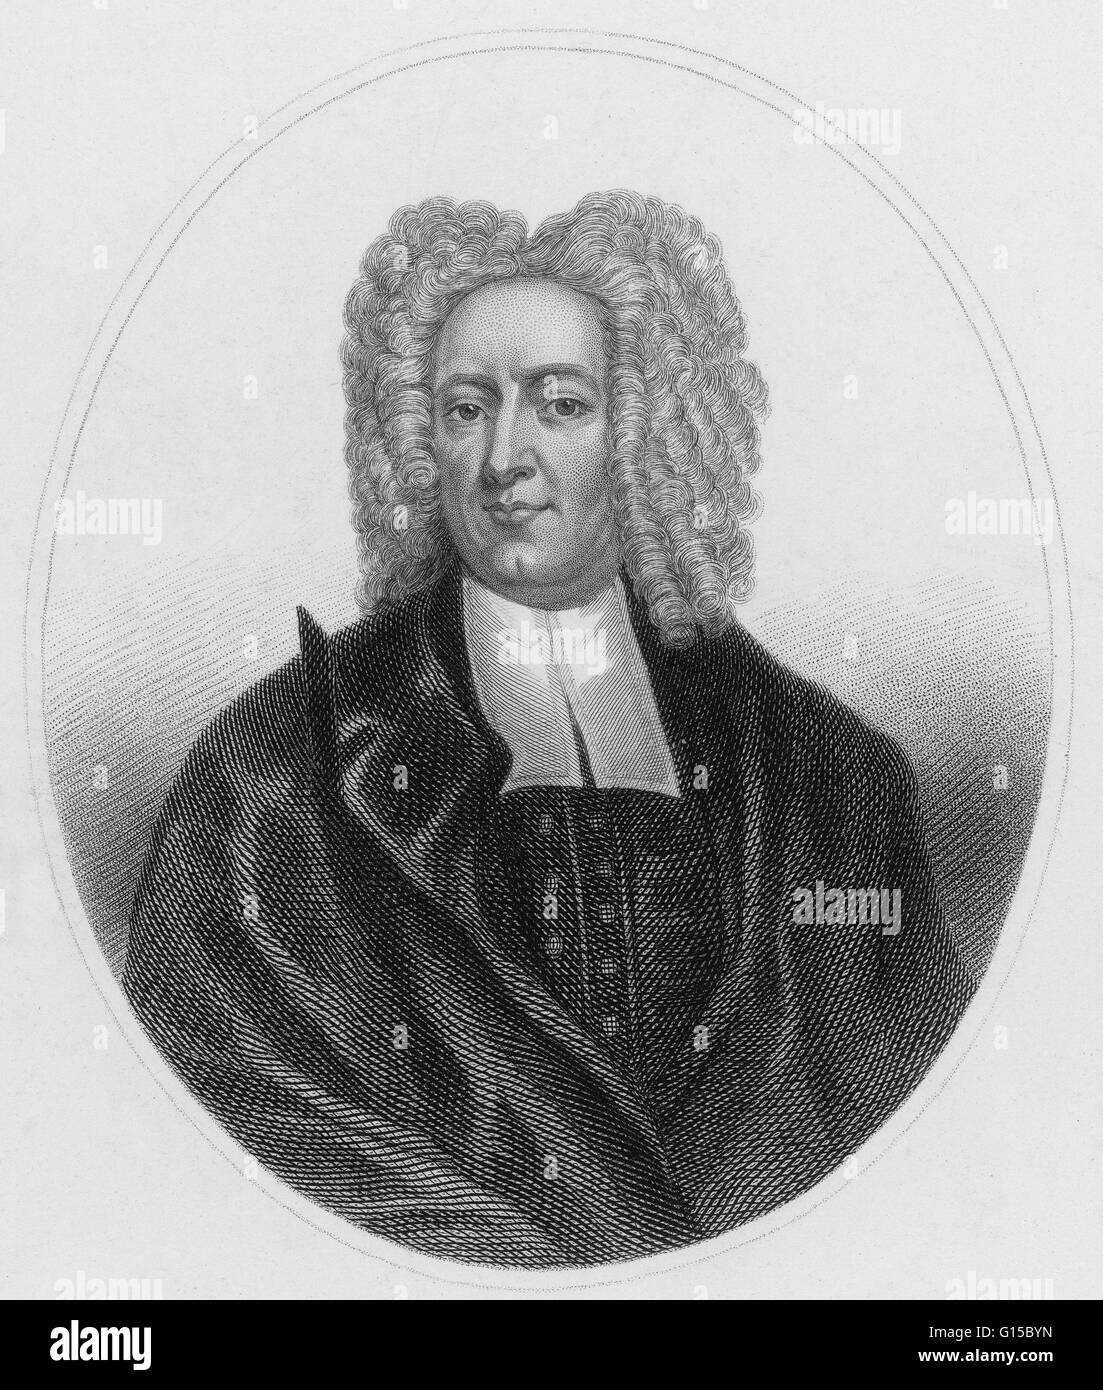 Cotton Mather (February 12, 1663 - February 13, 1728) was a socially and politically influential New England Puritan minister, prolific author and pamphleteer. He wrote more than 450 books and pamphlets that made him one of the most influential religious Stock Photo